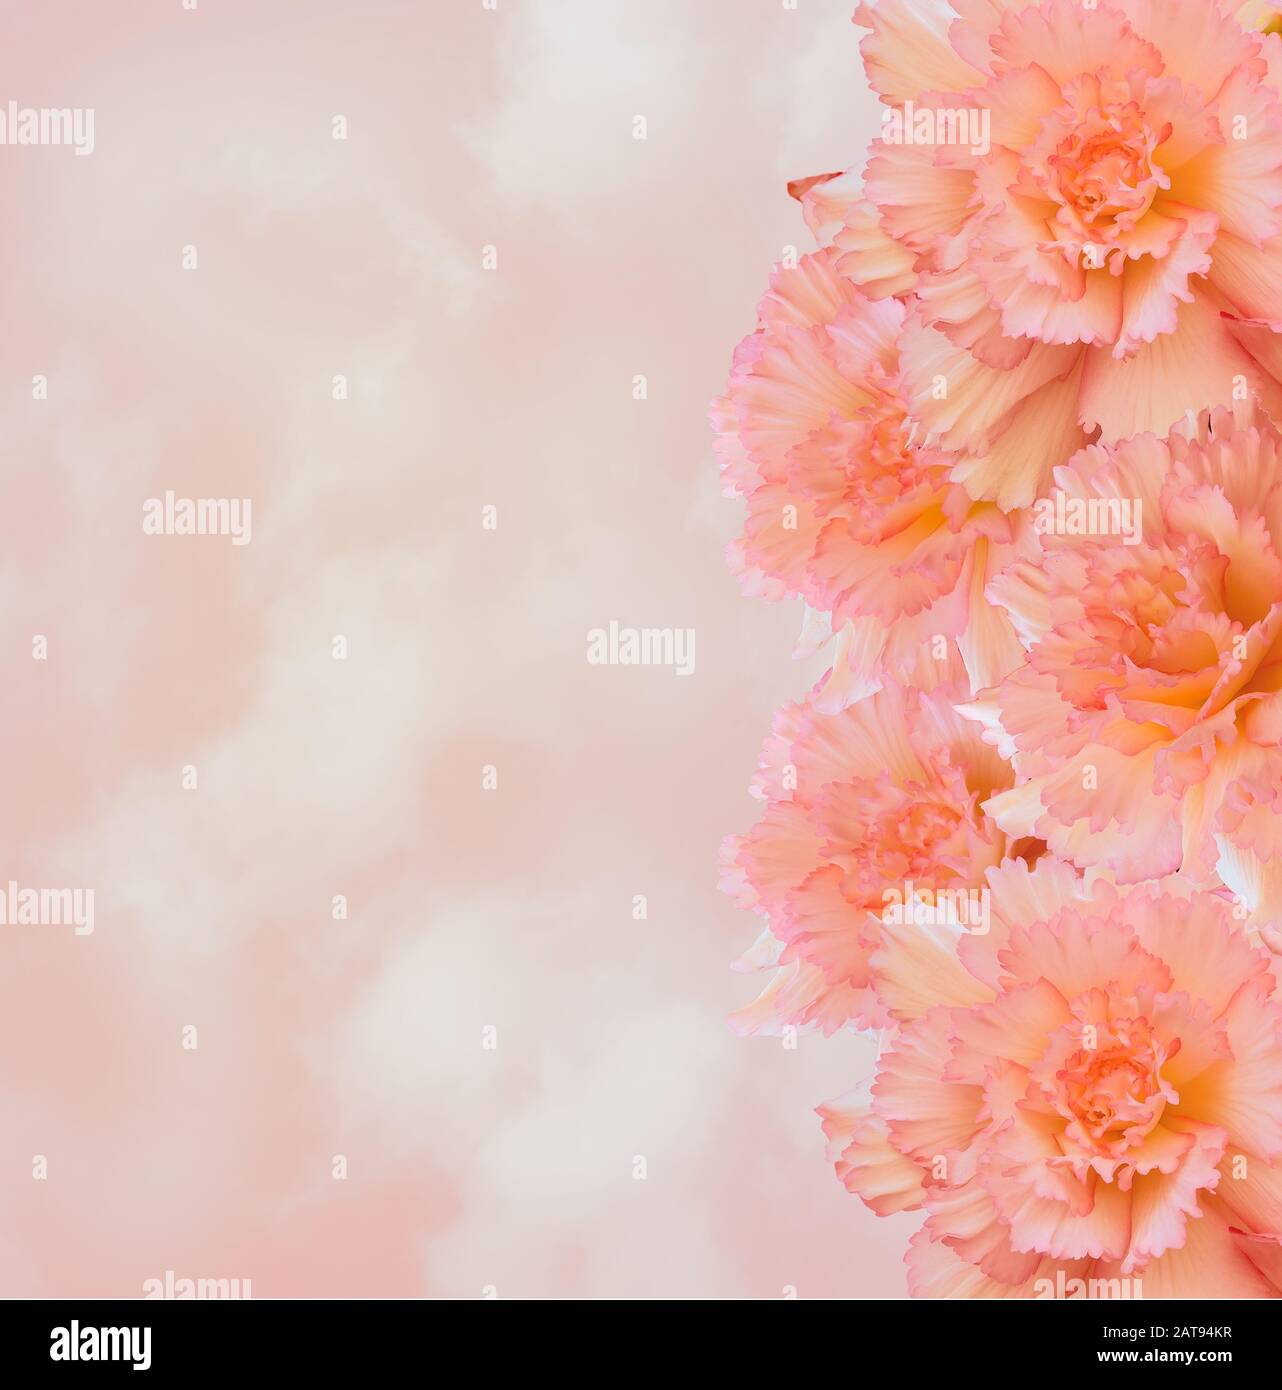 Gentle floral border with creamy-pink  large begonia flowers and blank space for text on blurred backgroung. Beautiful flowers with riffled petals and Stock Photo